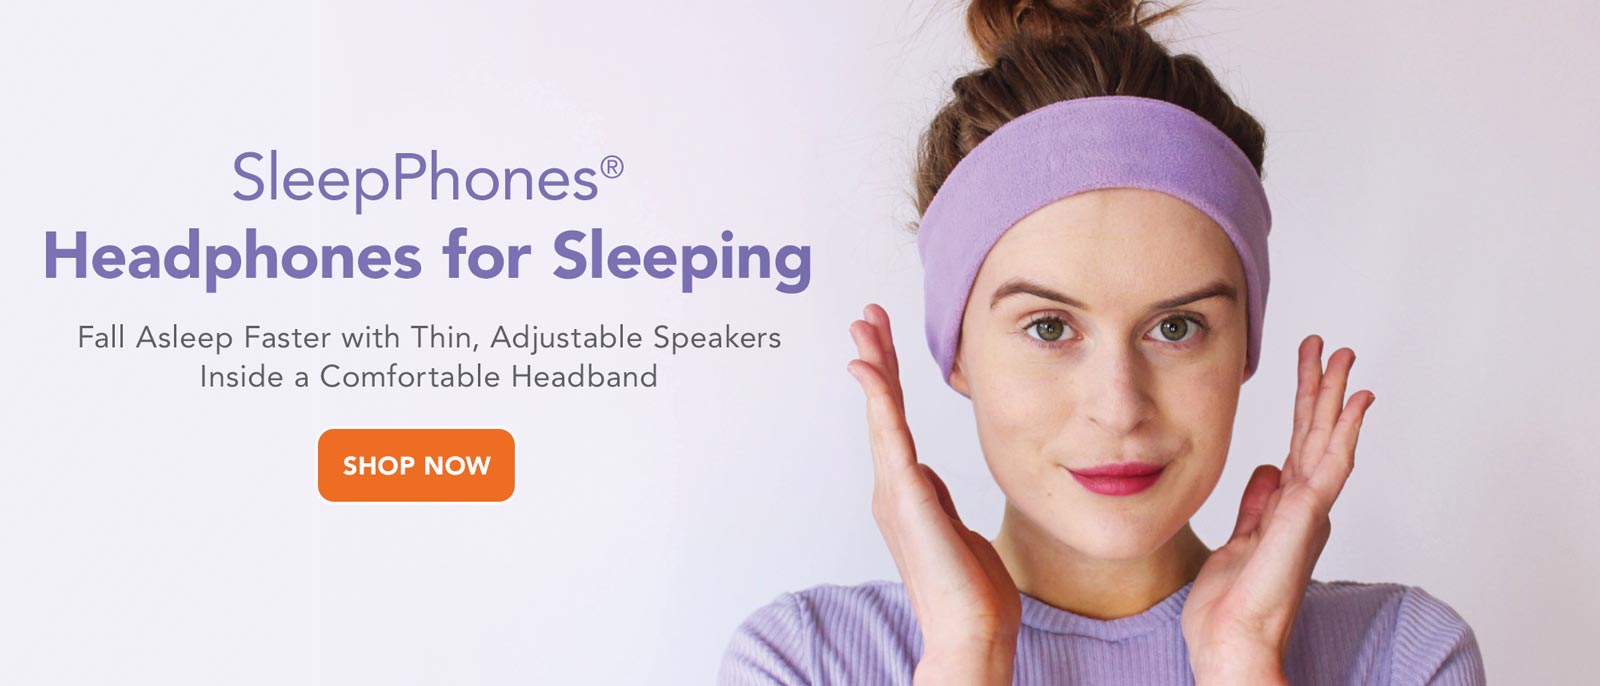 asmrtist becca wearing lavender SleepPhones Wireless headphones with hands at face smiling